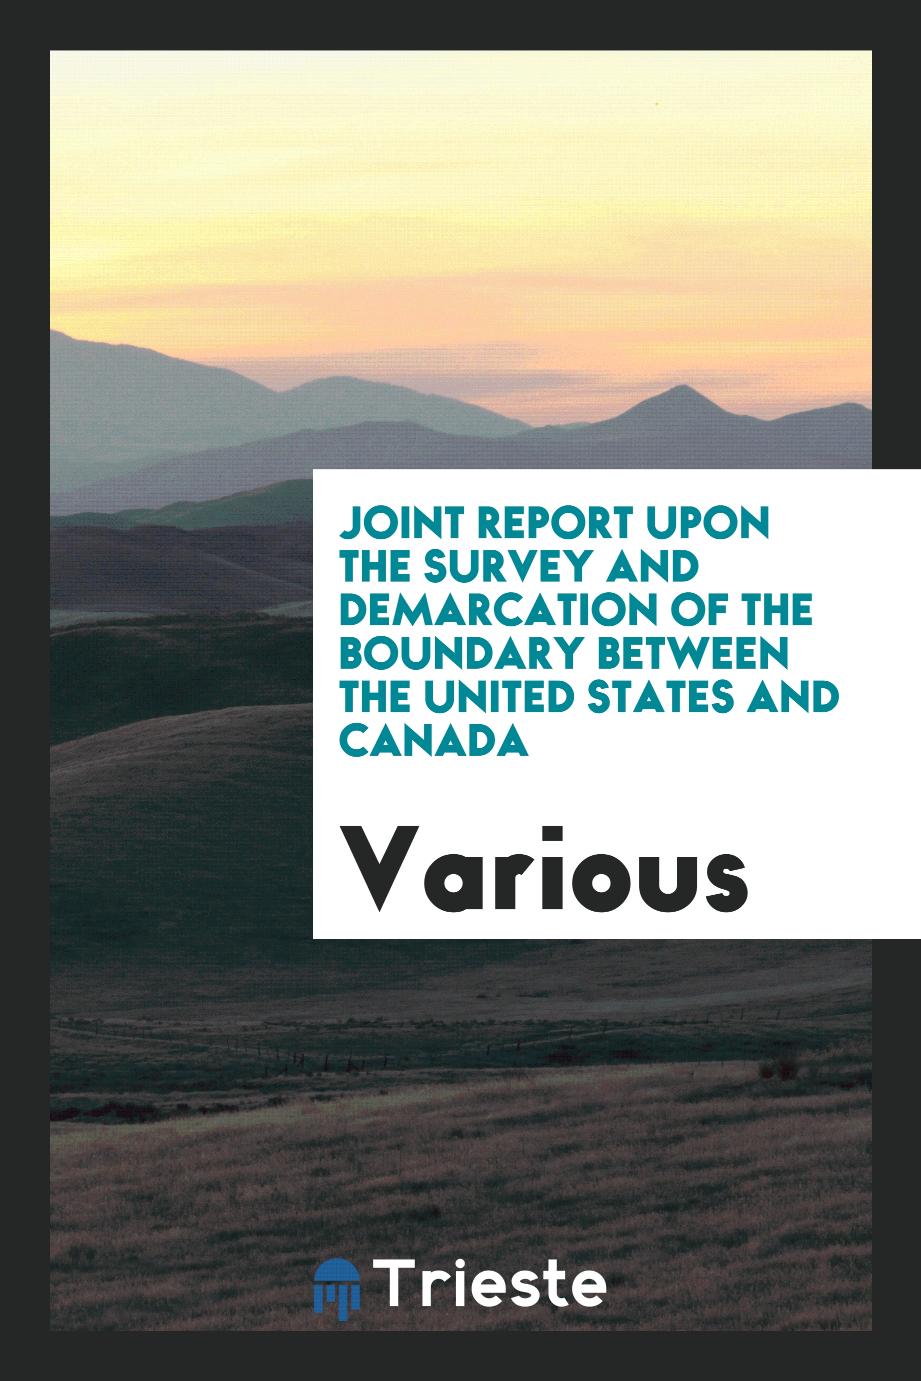 Joint Report upon the Survey and Demarcation of the Boundary Between the United States and Canada